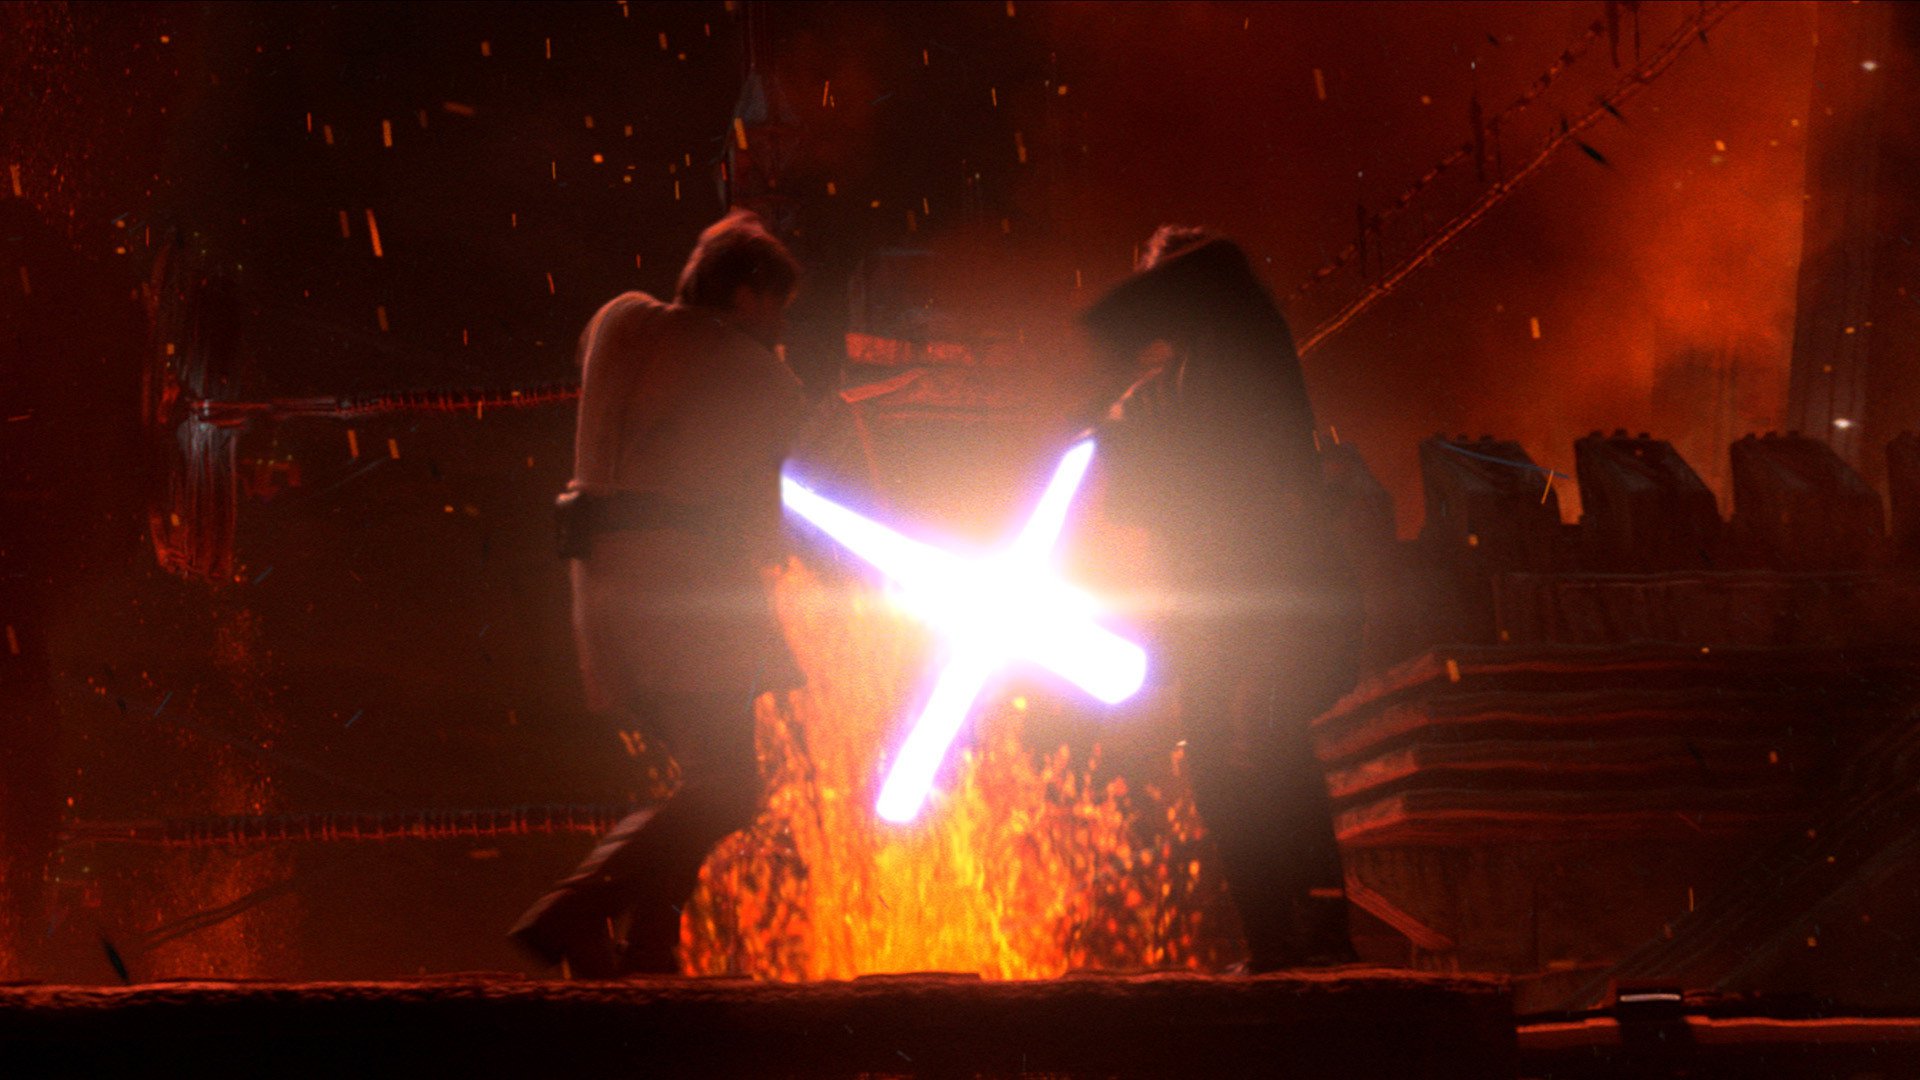 Star Wars Ep. III: Revenge of the Sith download the last version for android